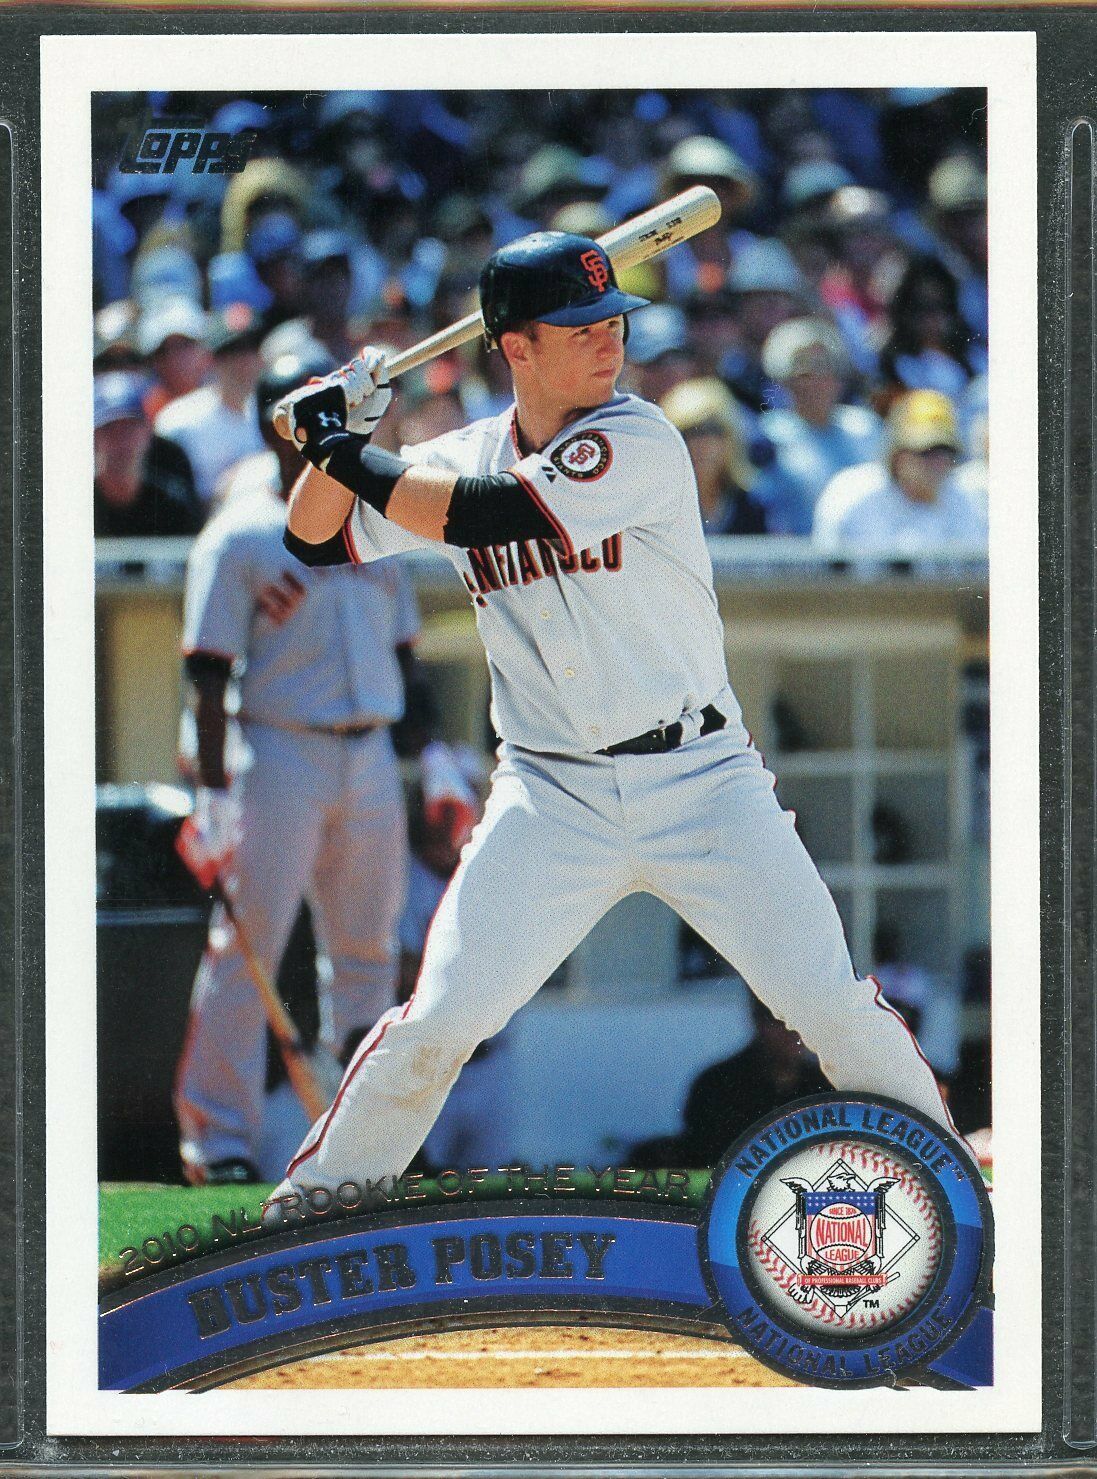 Buster Posey 2011 Topps 2010 NL Rookie of the Year Series Mint Card #2